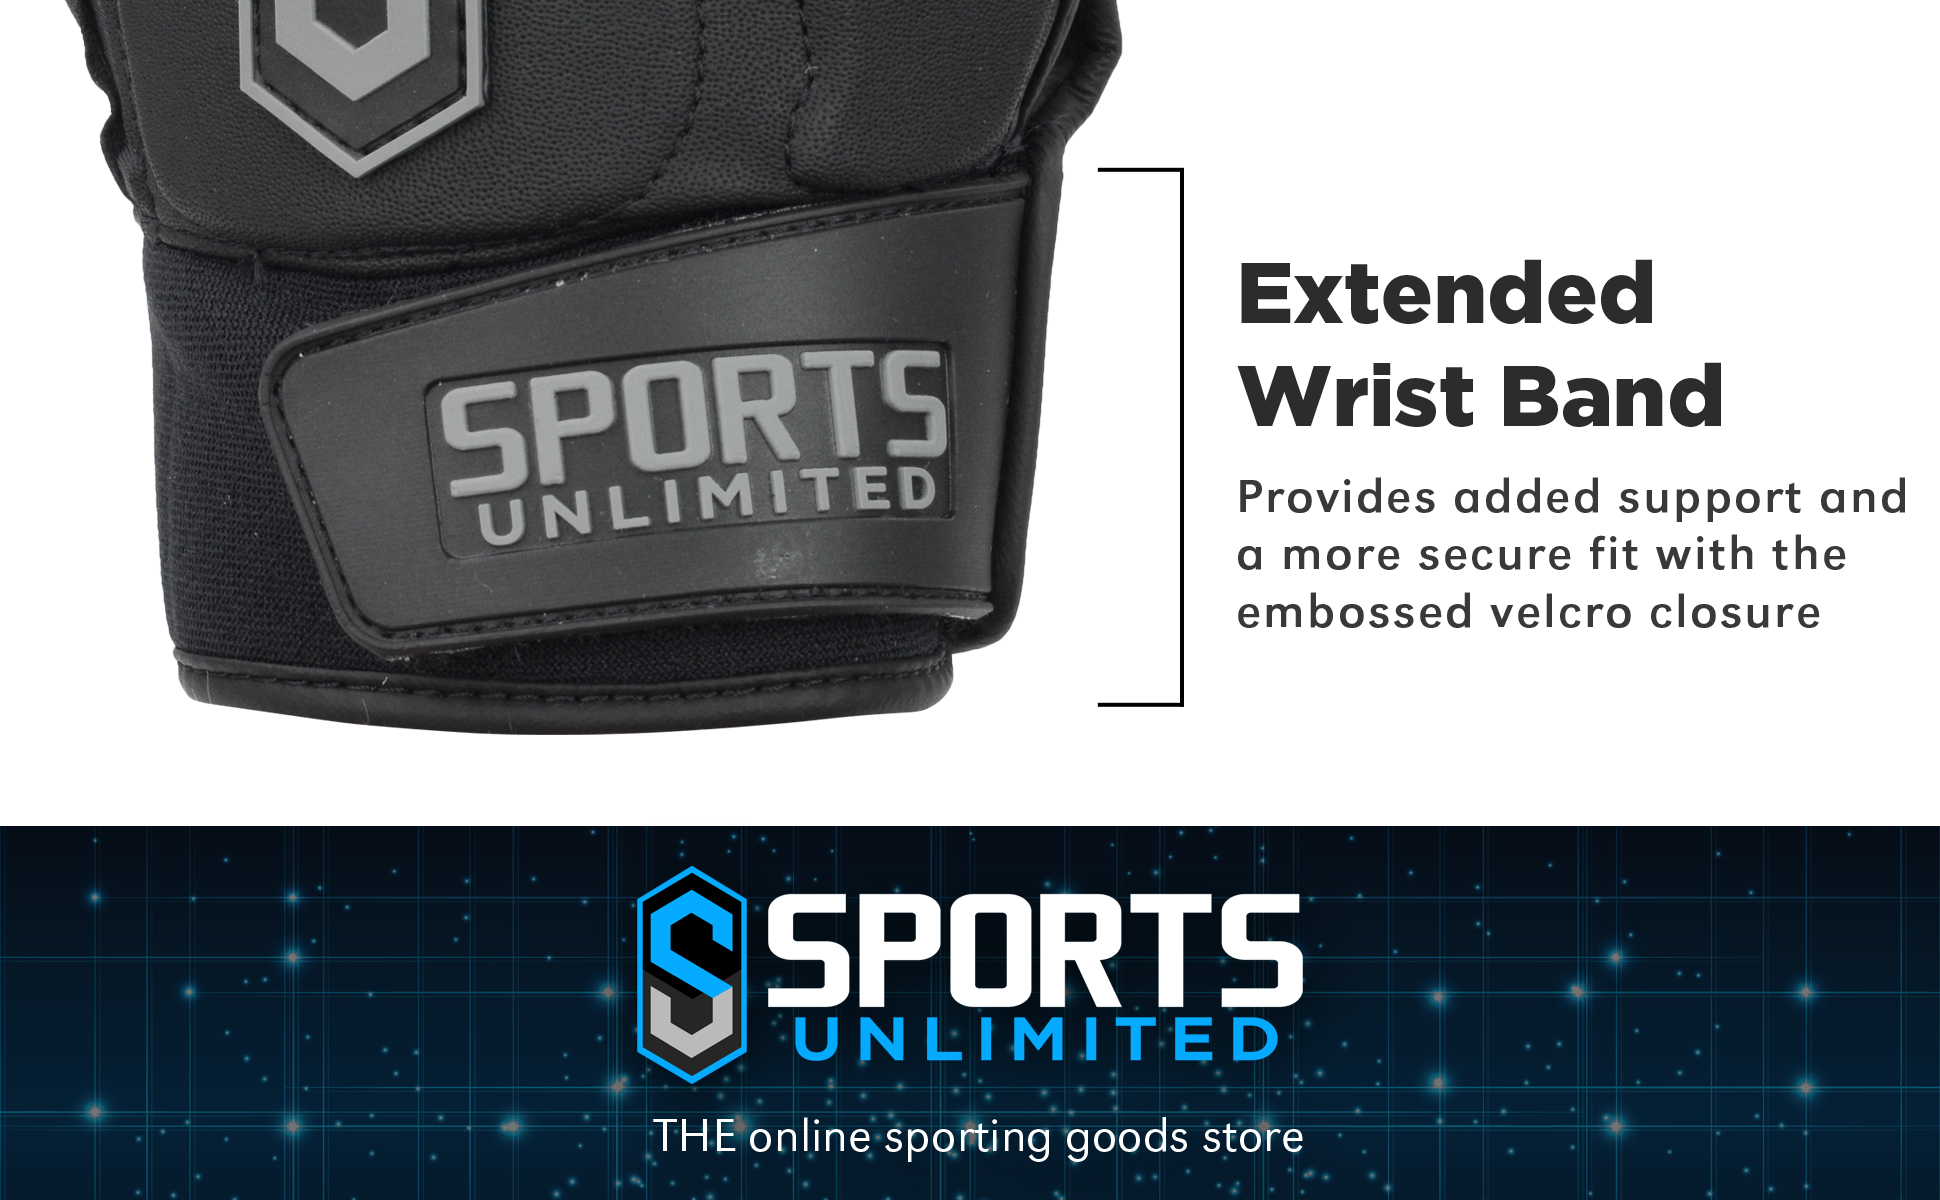 Extended Wrist Band with Embossed Velcor Closure